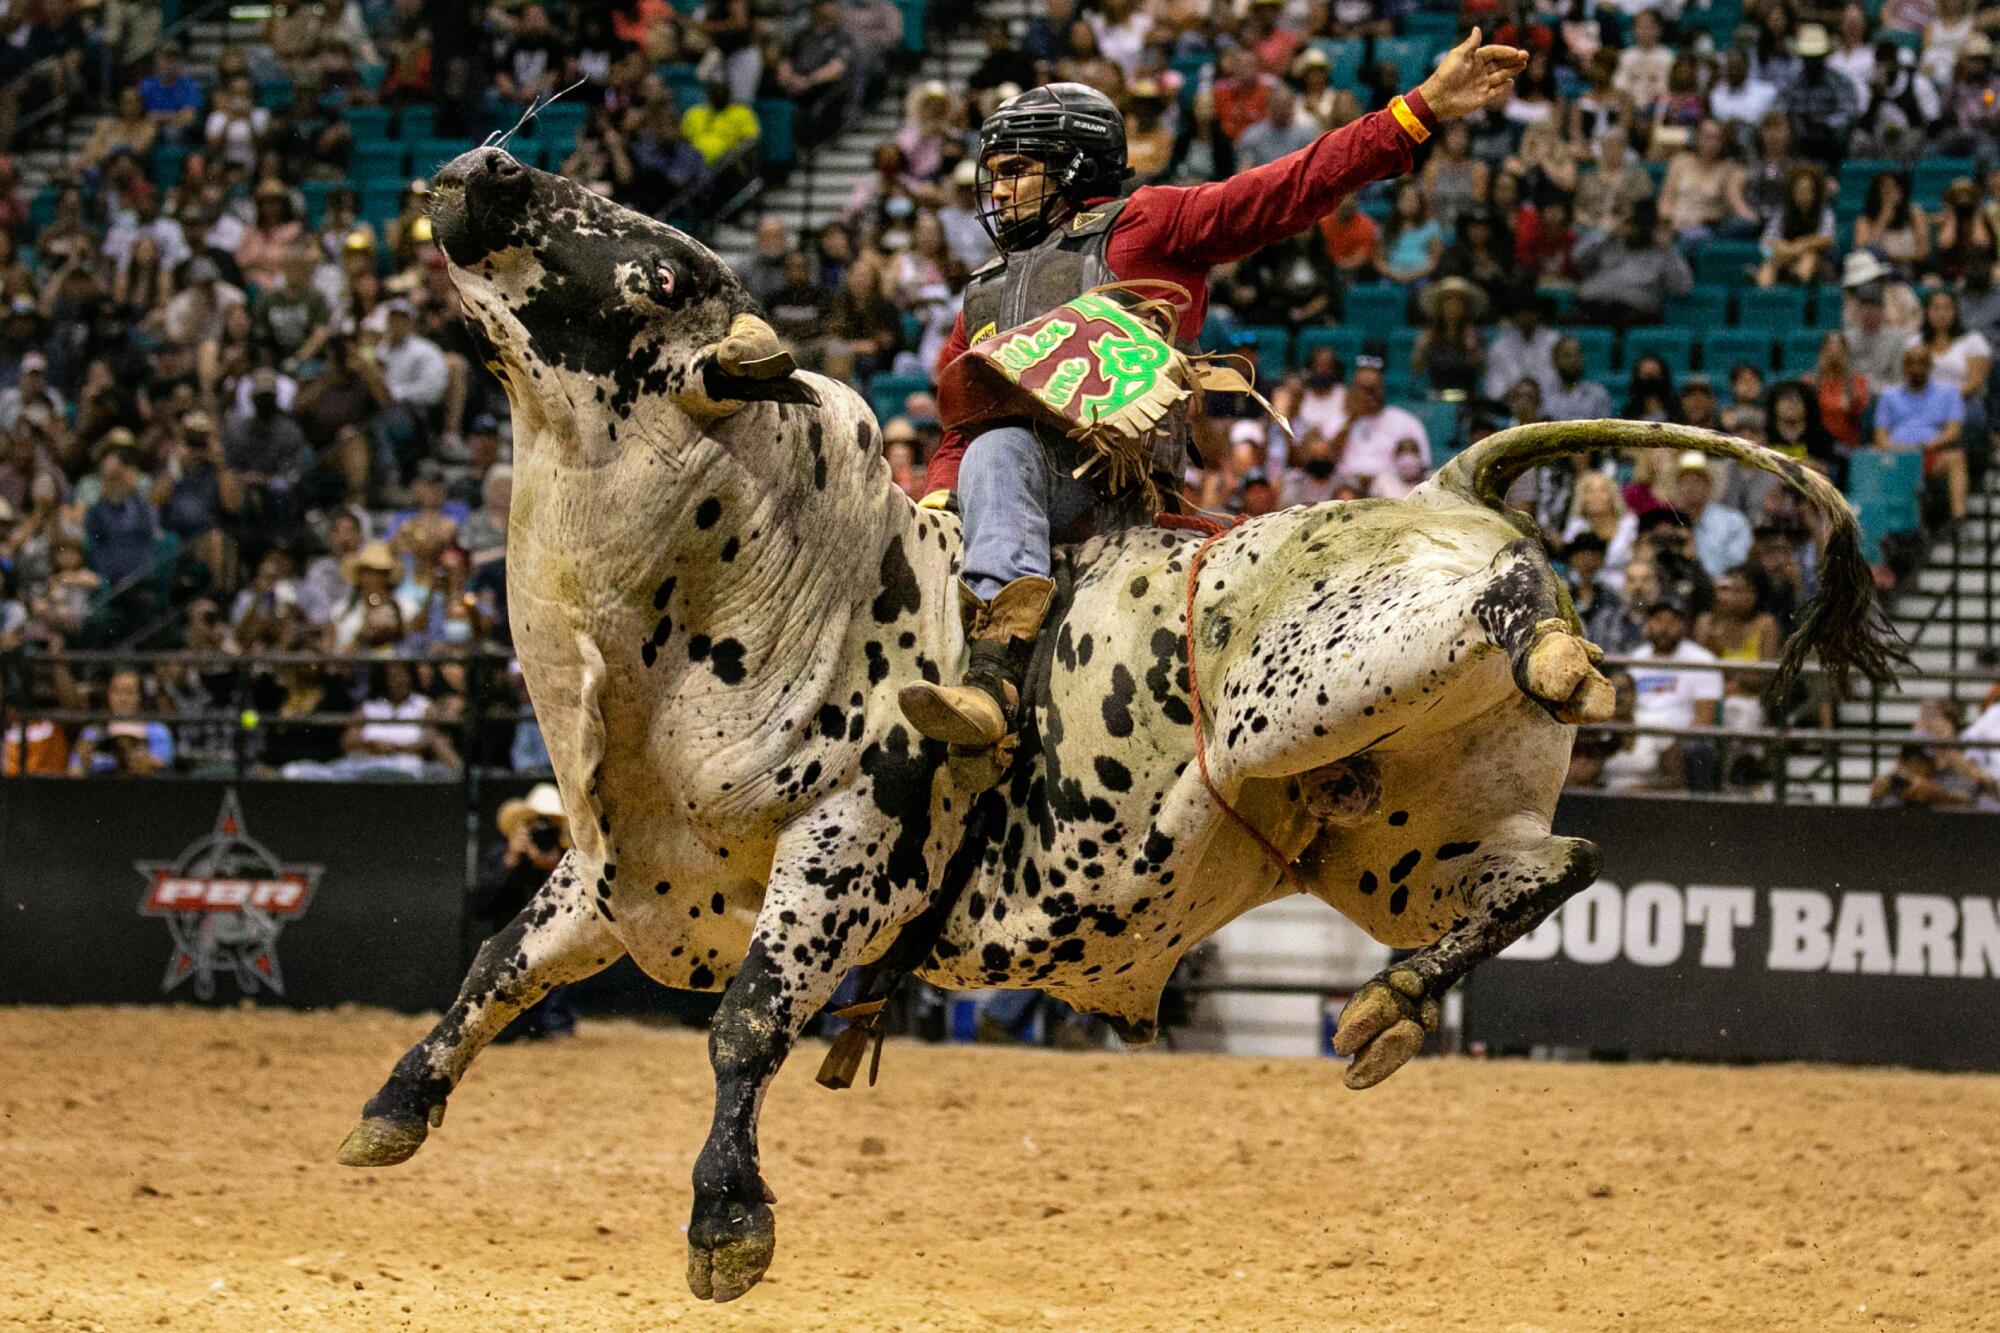 A cowboy competes in the bull riding competition at the Bill Pickett Invitational Rodeo in Las Vegas